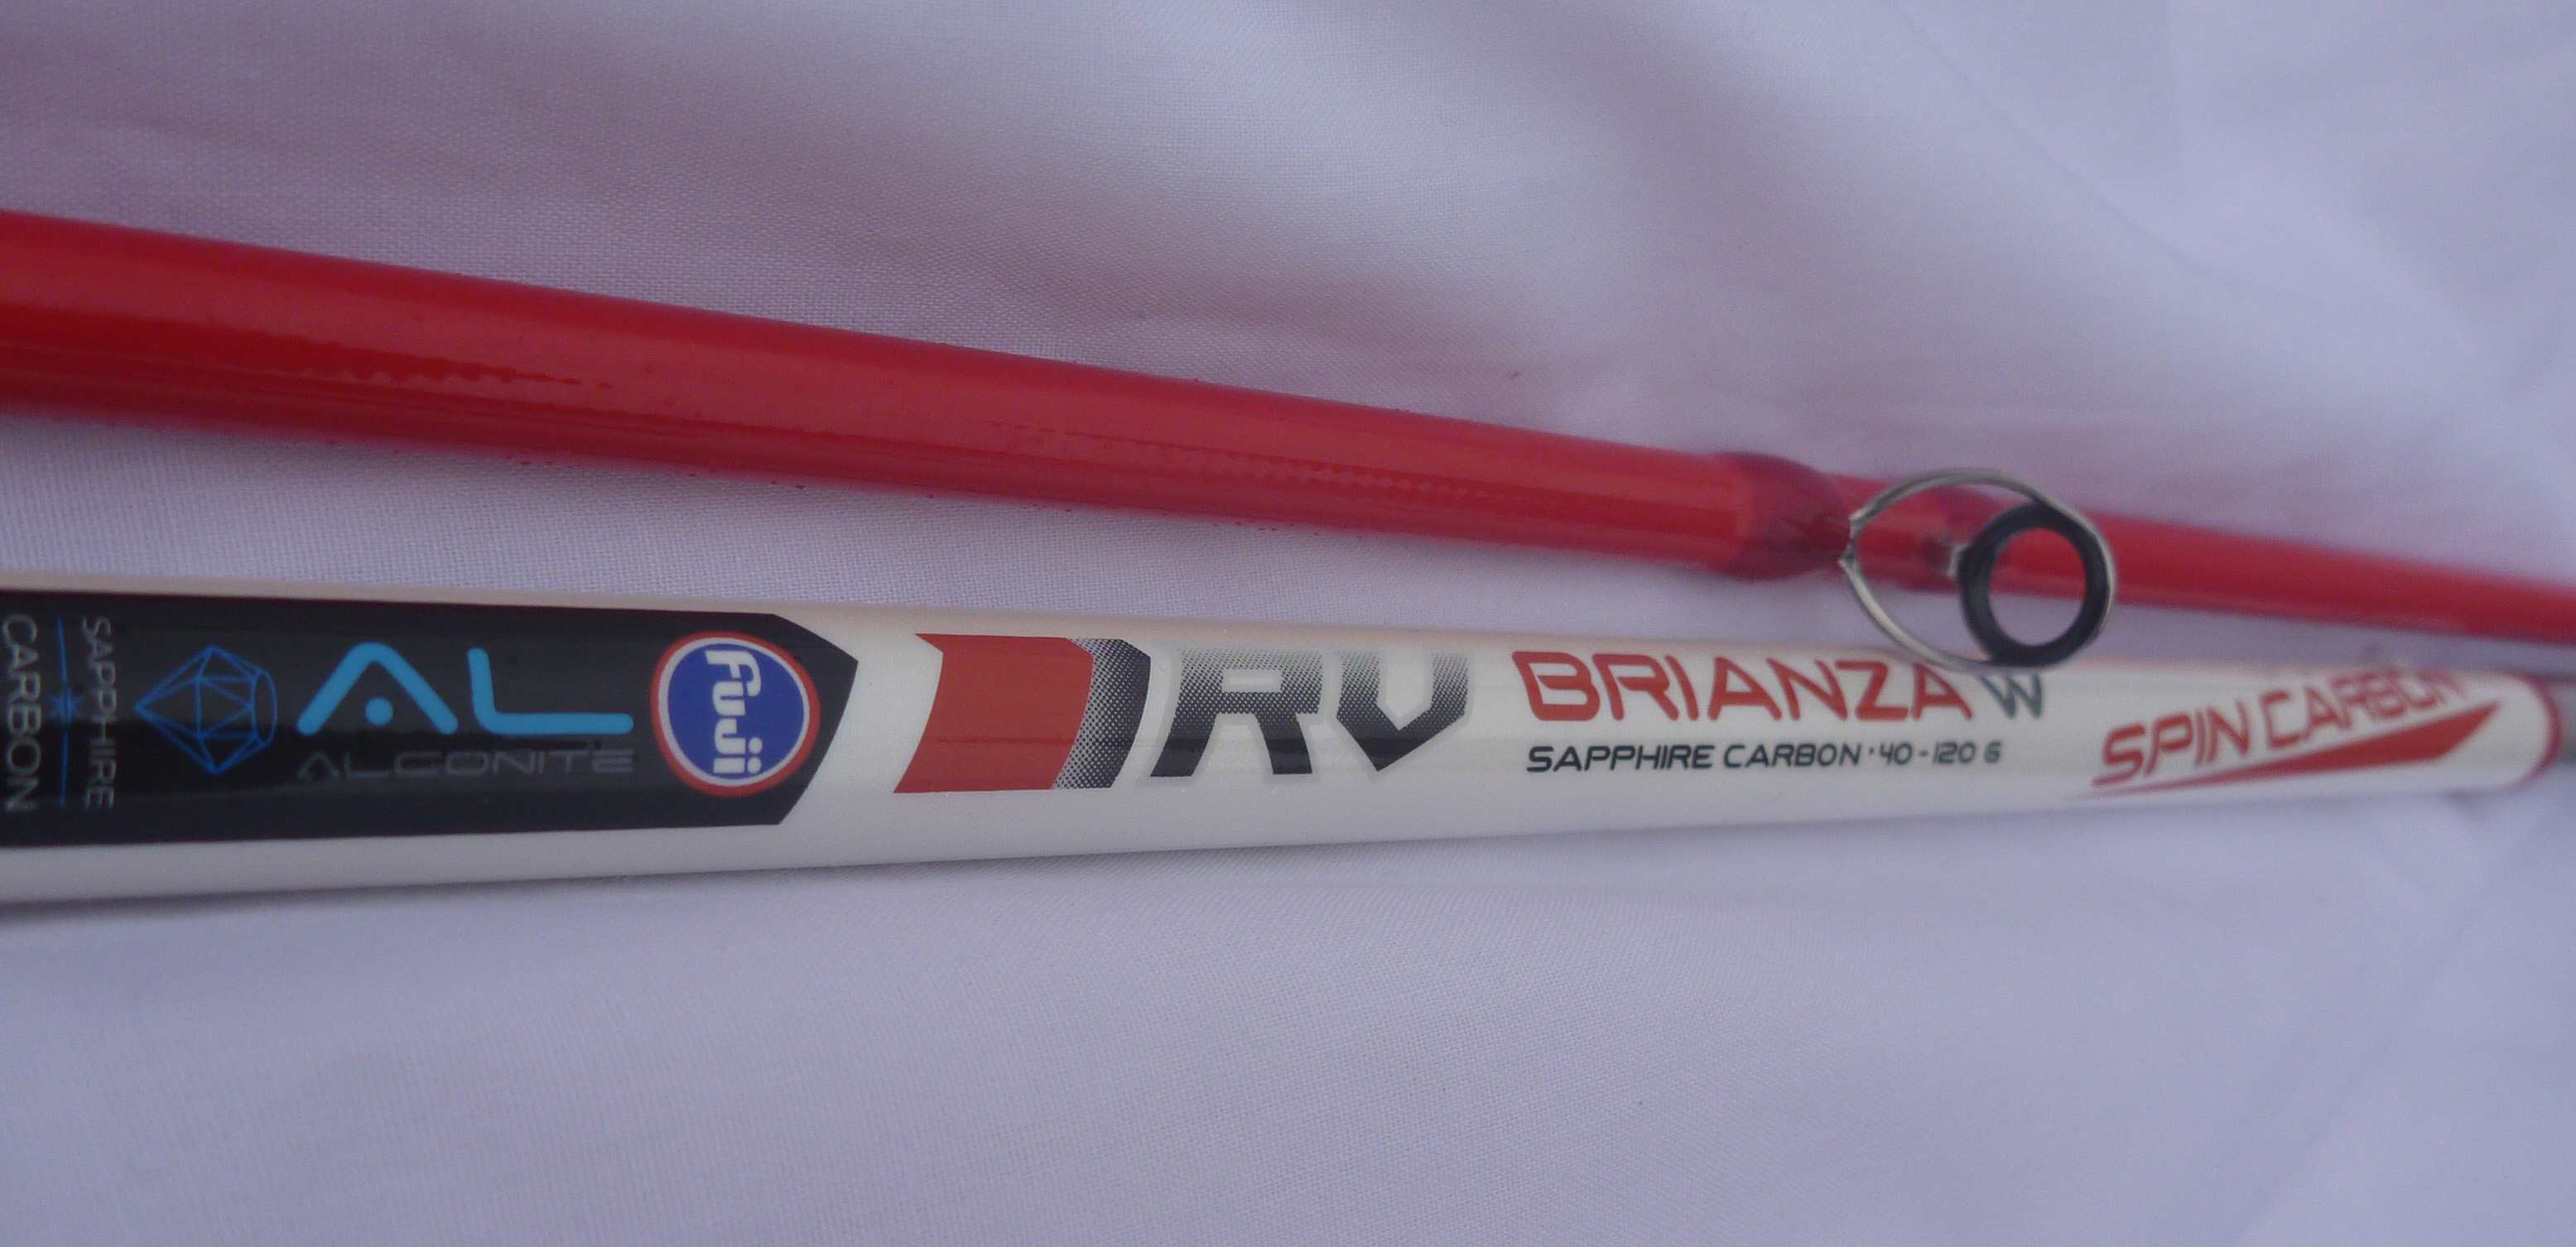 canne a peche spinning Brianza Renzo Valdieri 40-120 gr spin action sapphire carbon